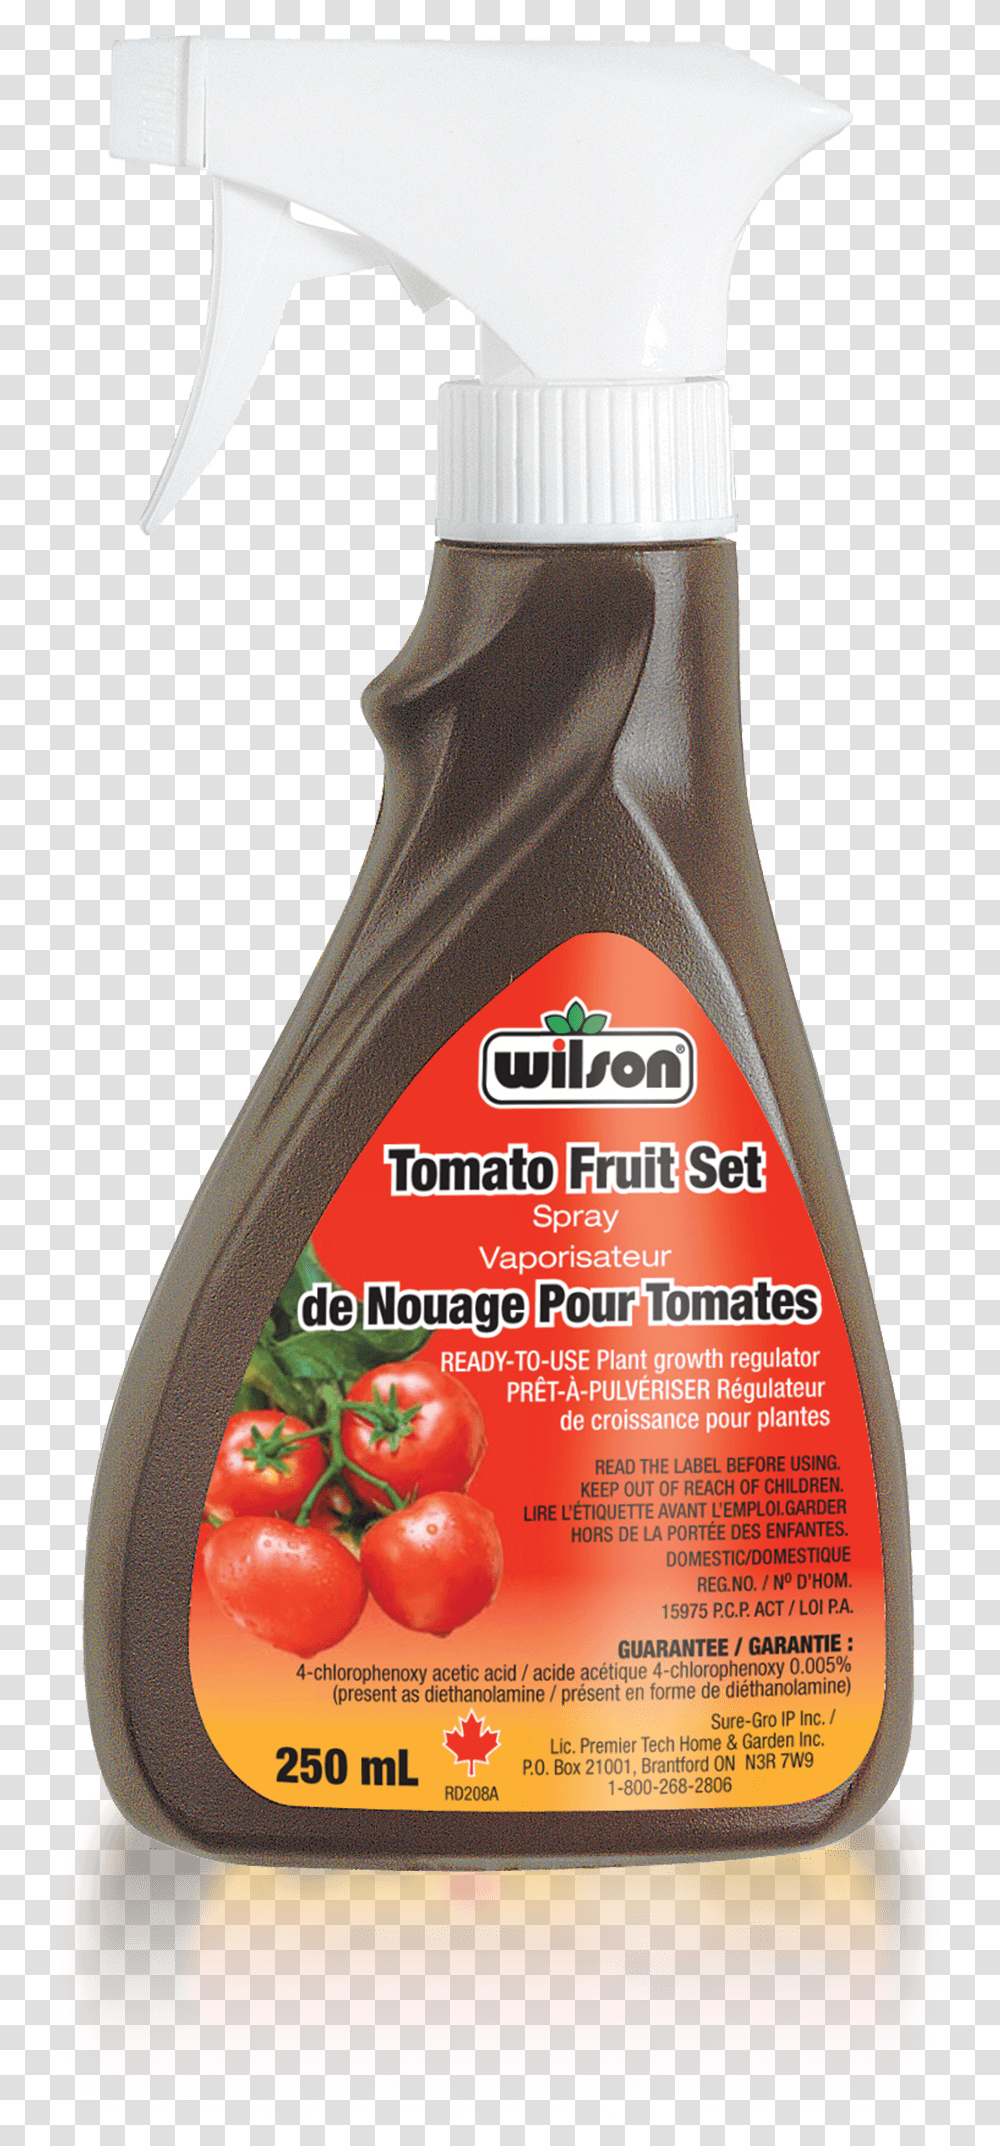 Wilson Tomato Fruit Set Spray Cycle Of A Tomato Plant, Food, Ketchup, Seasoning, Syrup Transparent Png